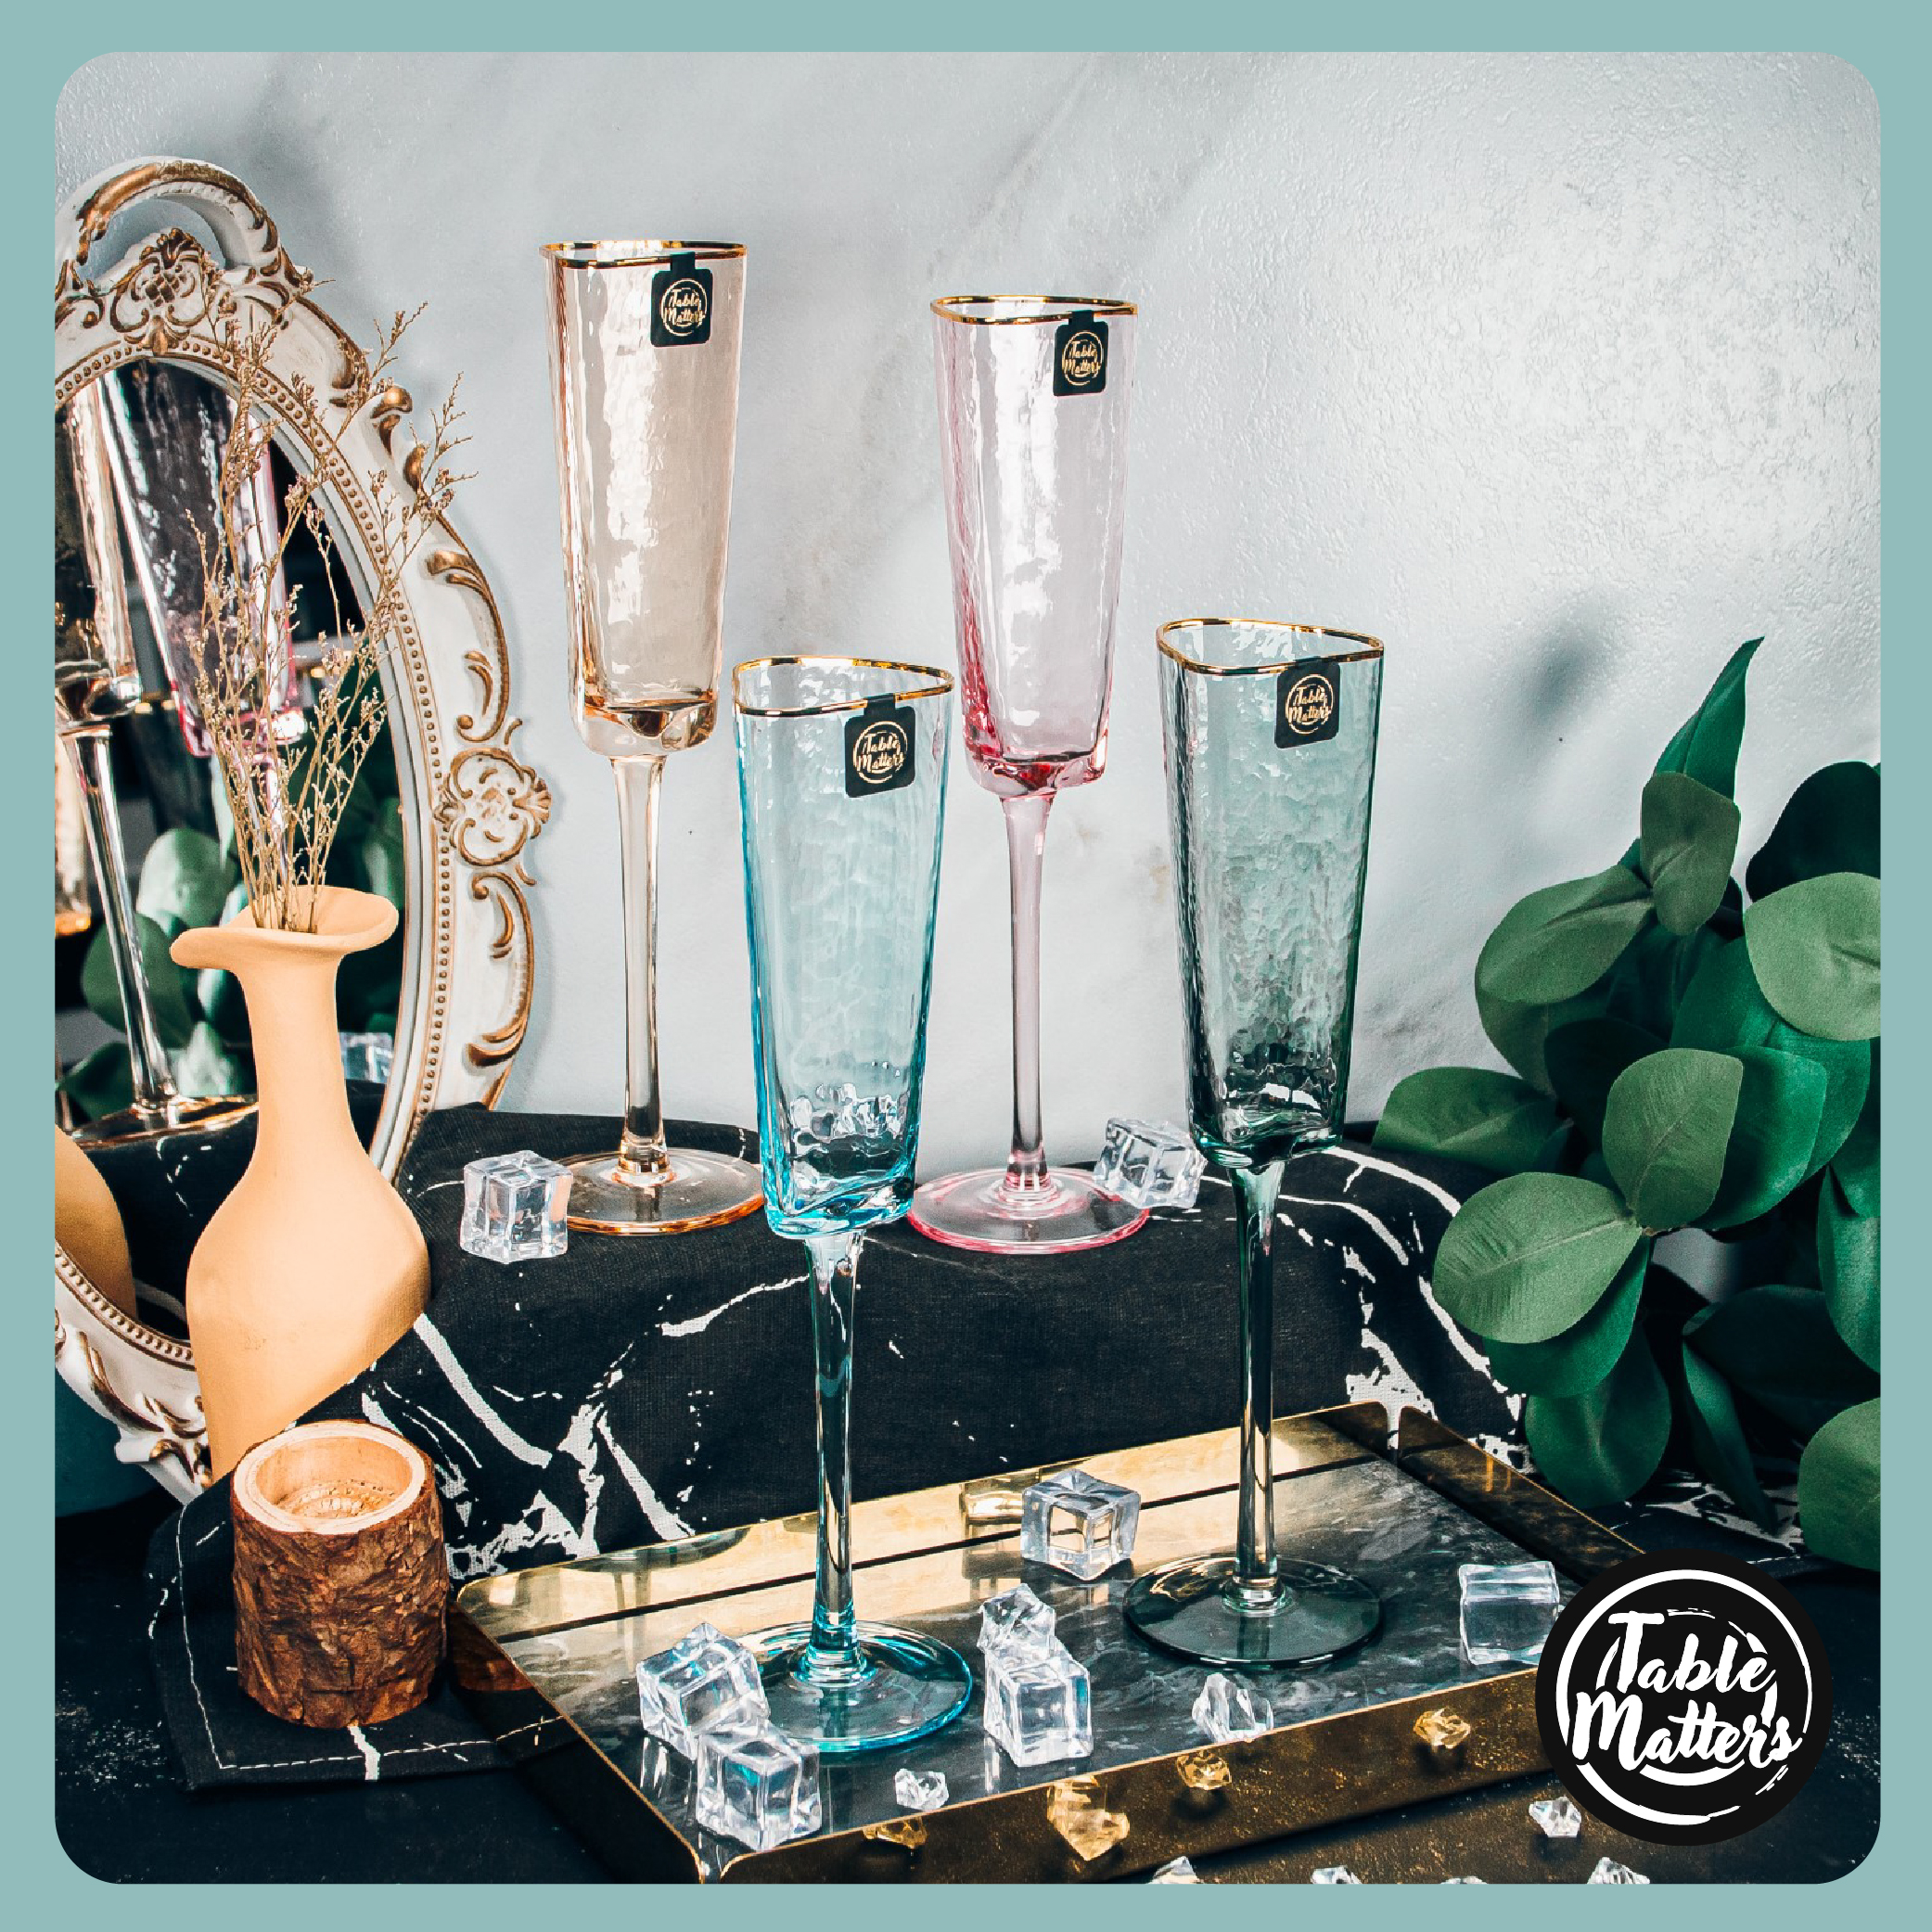 Bundle Deal - Champagne Glass - 200ml - Set of 4